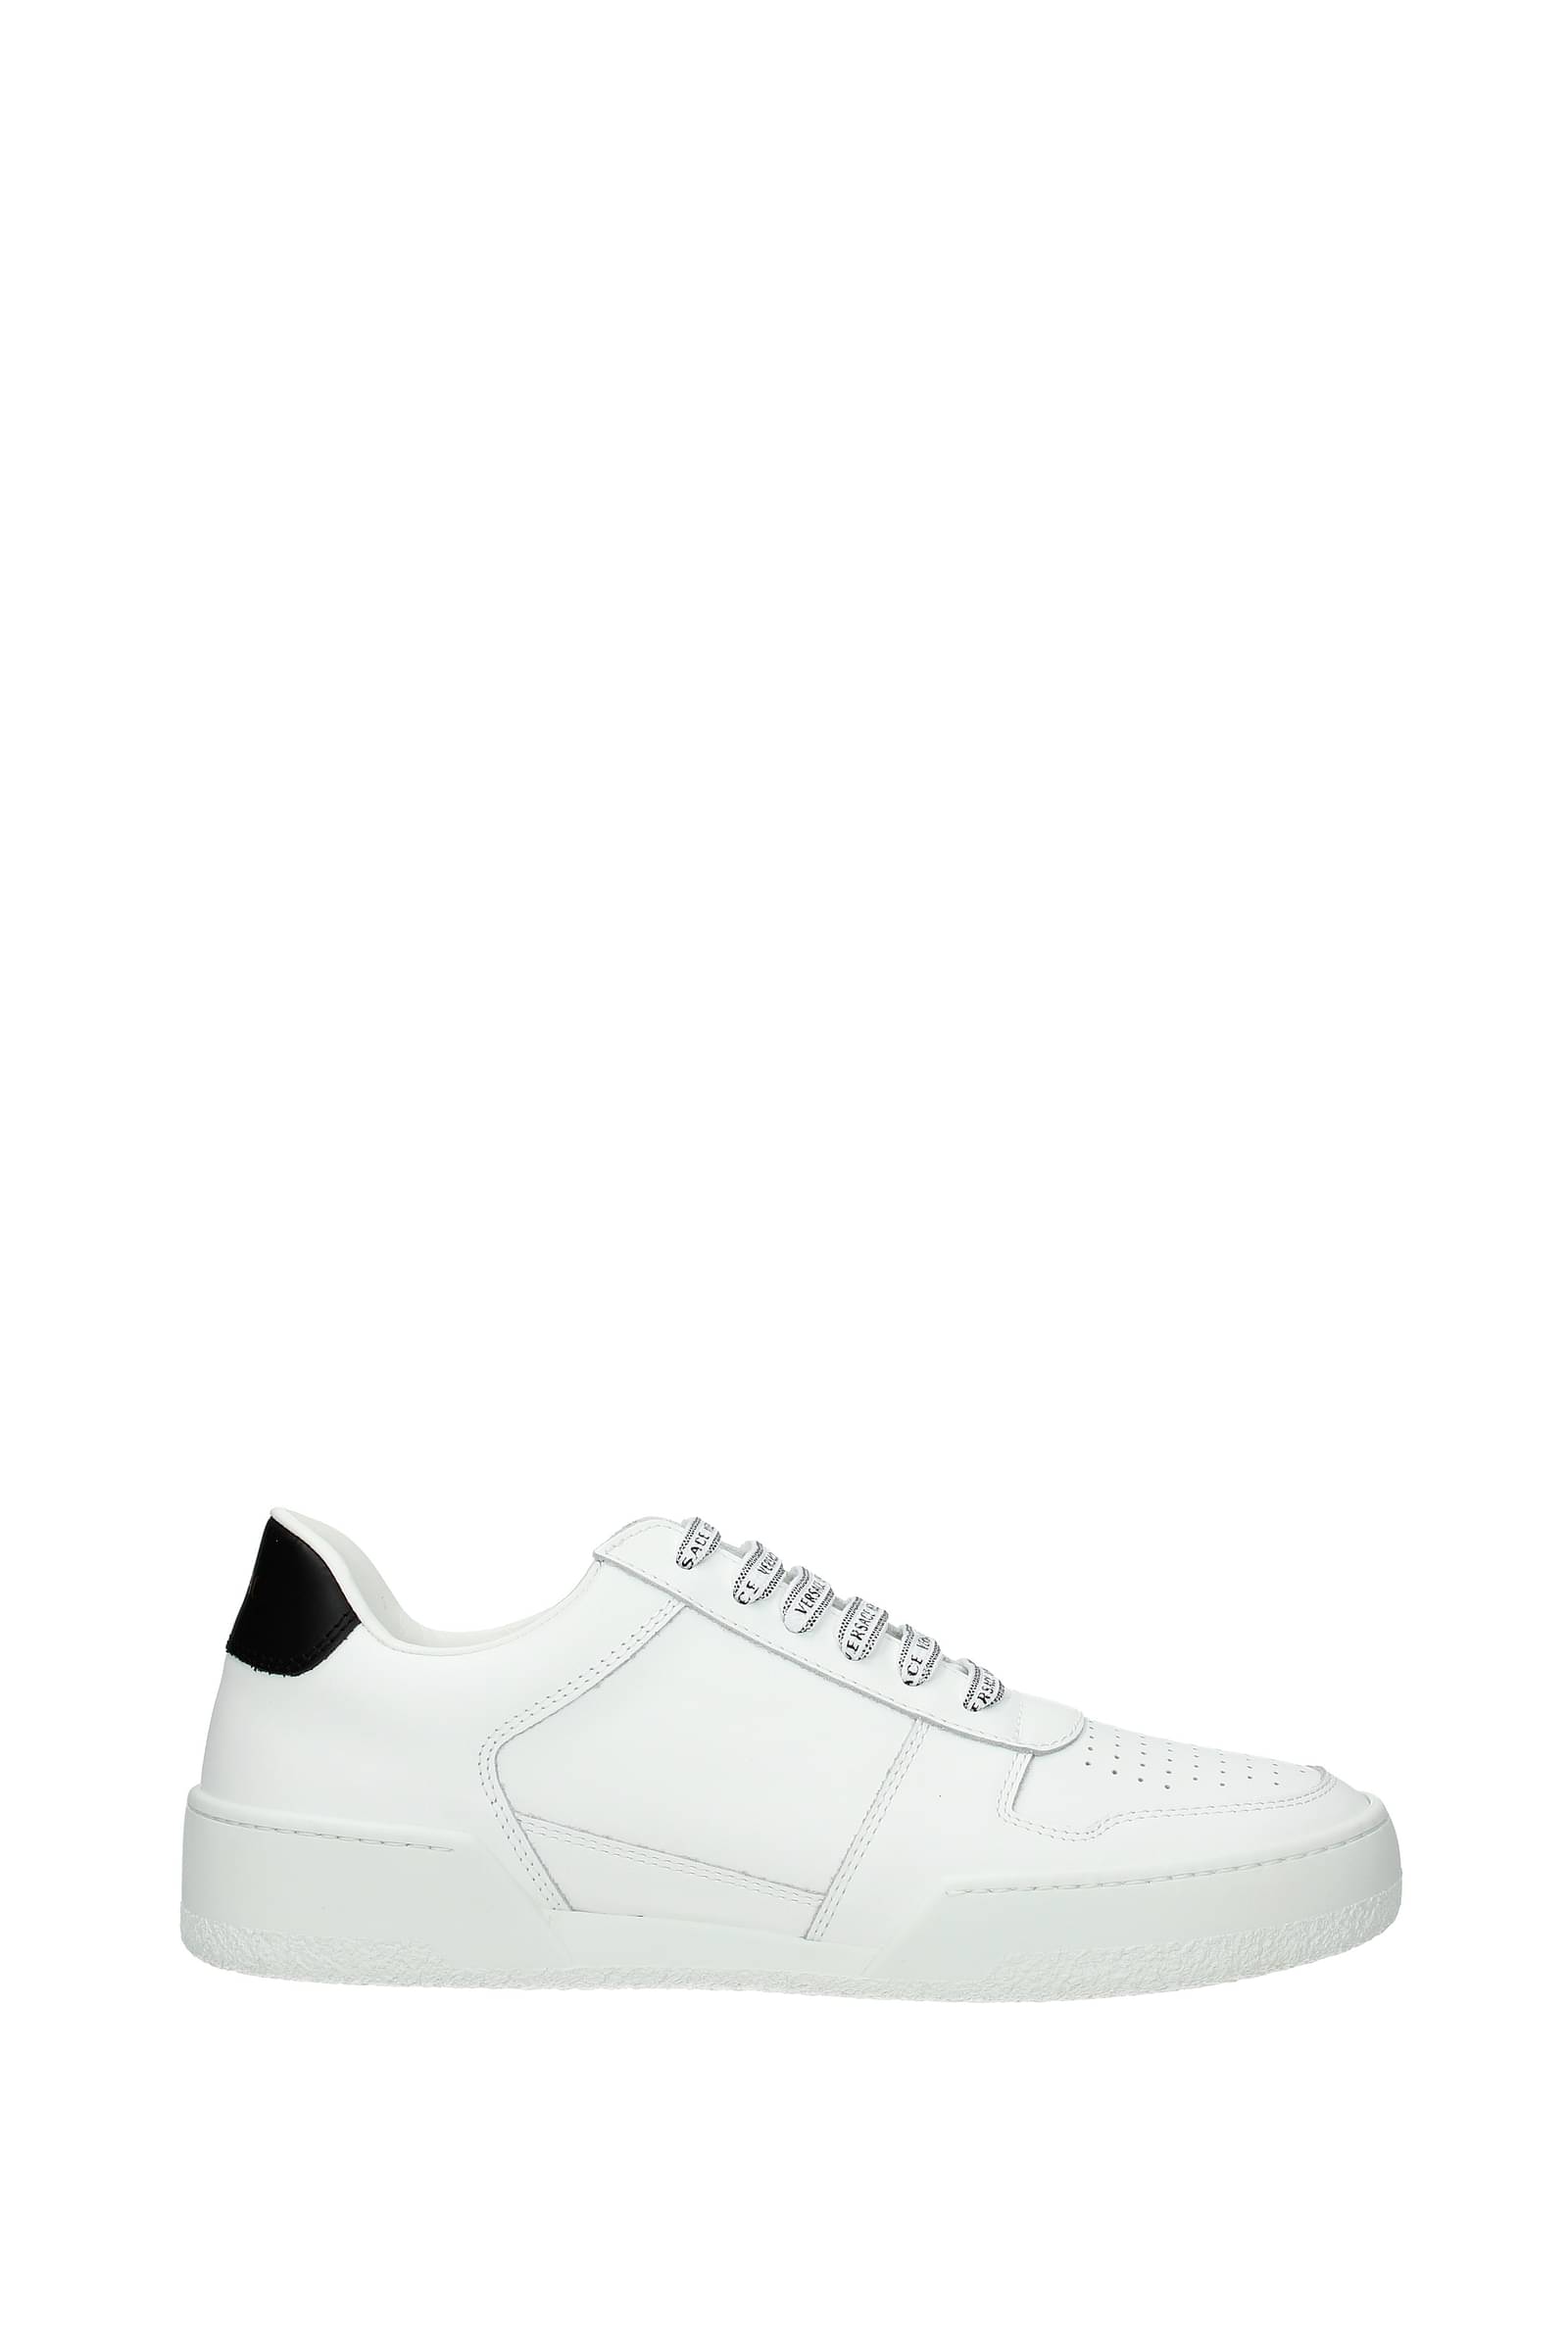 versace shoes outlet online